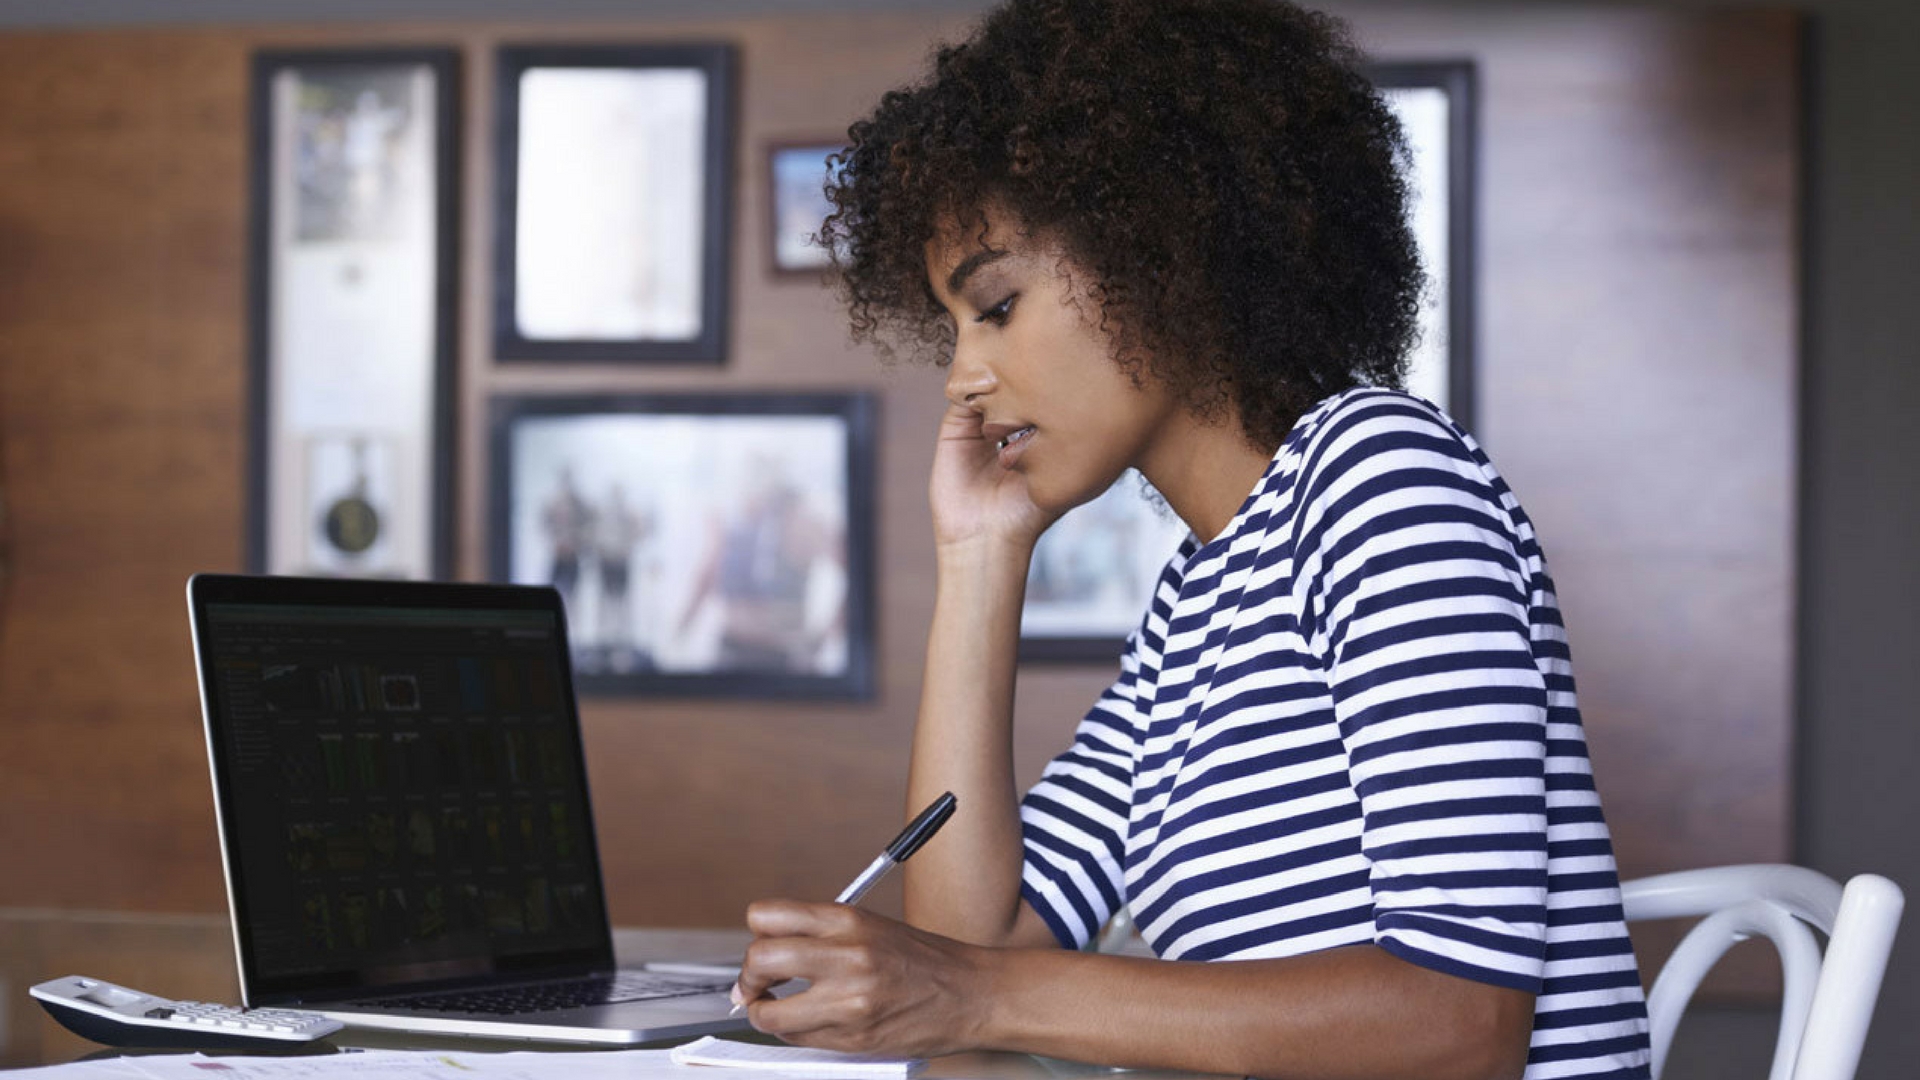 Is Working From Home Making You Miserable?